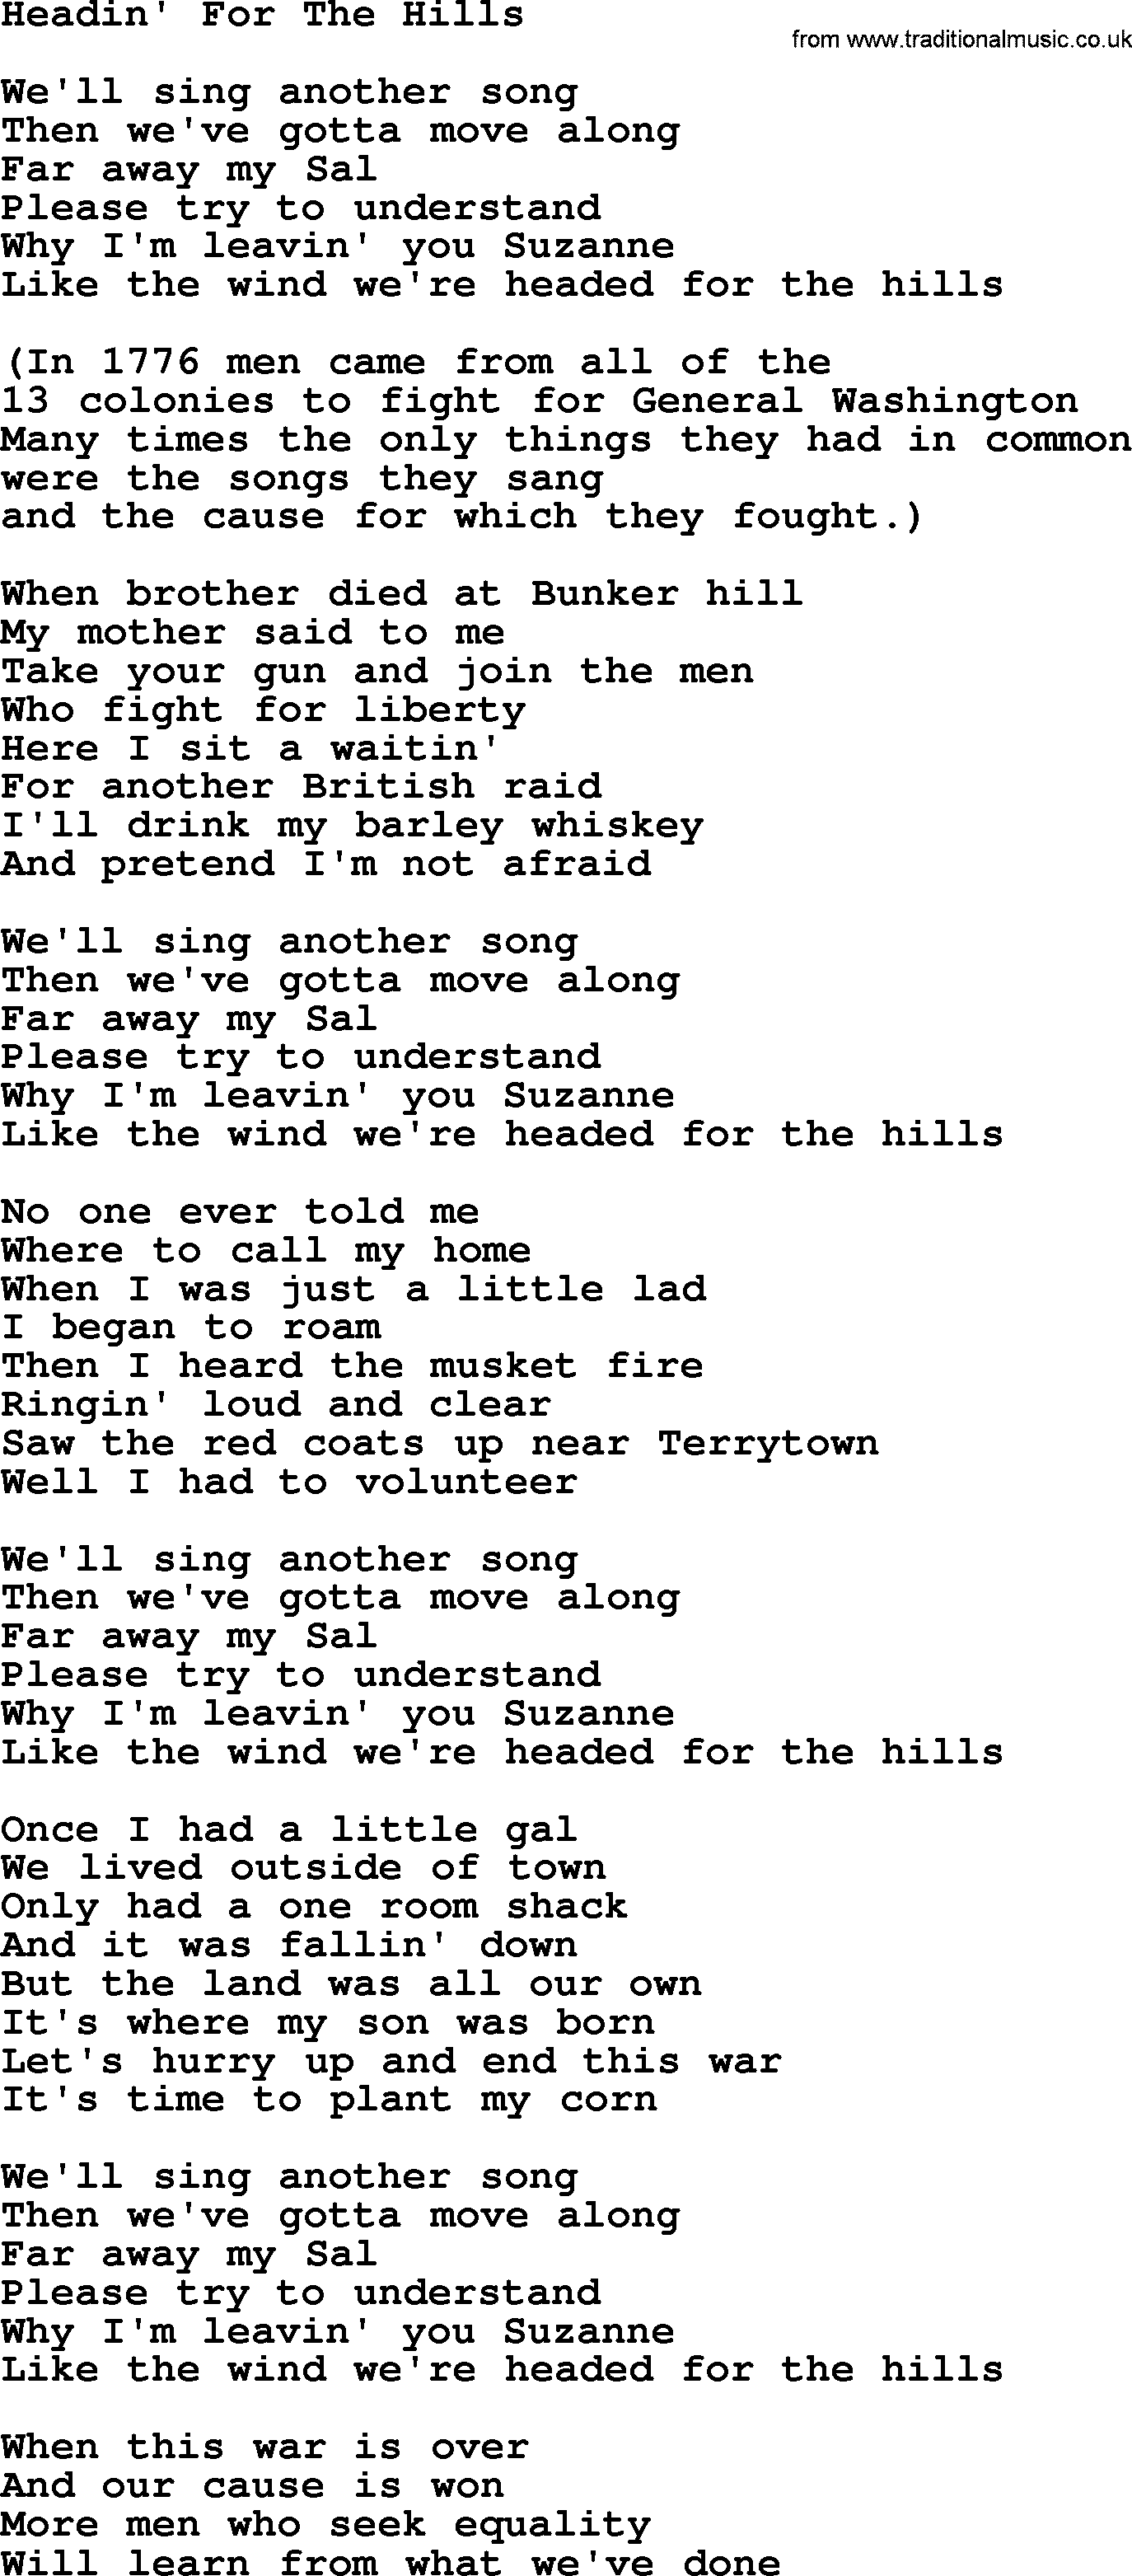 The Byrds song Headin' For The Hills, lyrics